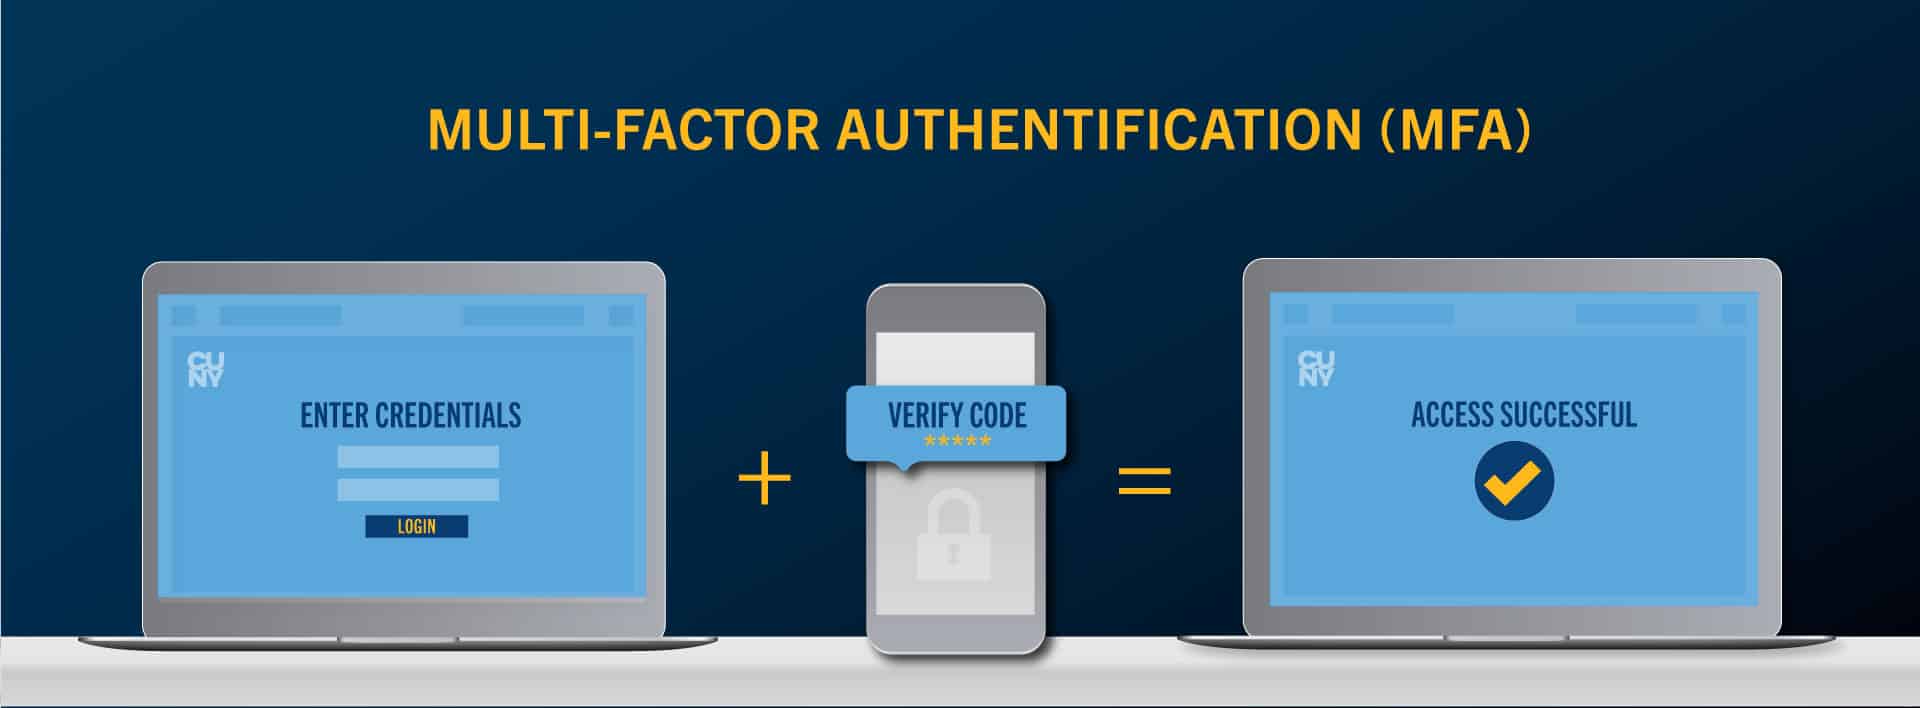 How to Enable Office 365 MFA (Multi-Factor Authentication)